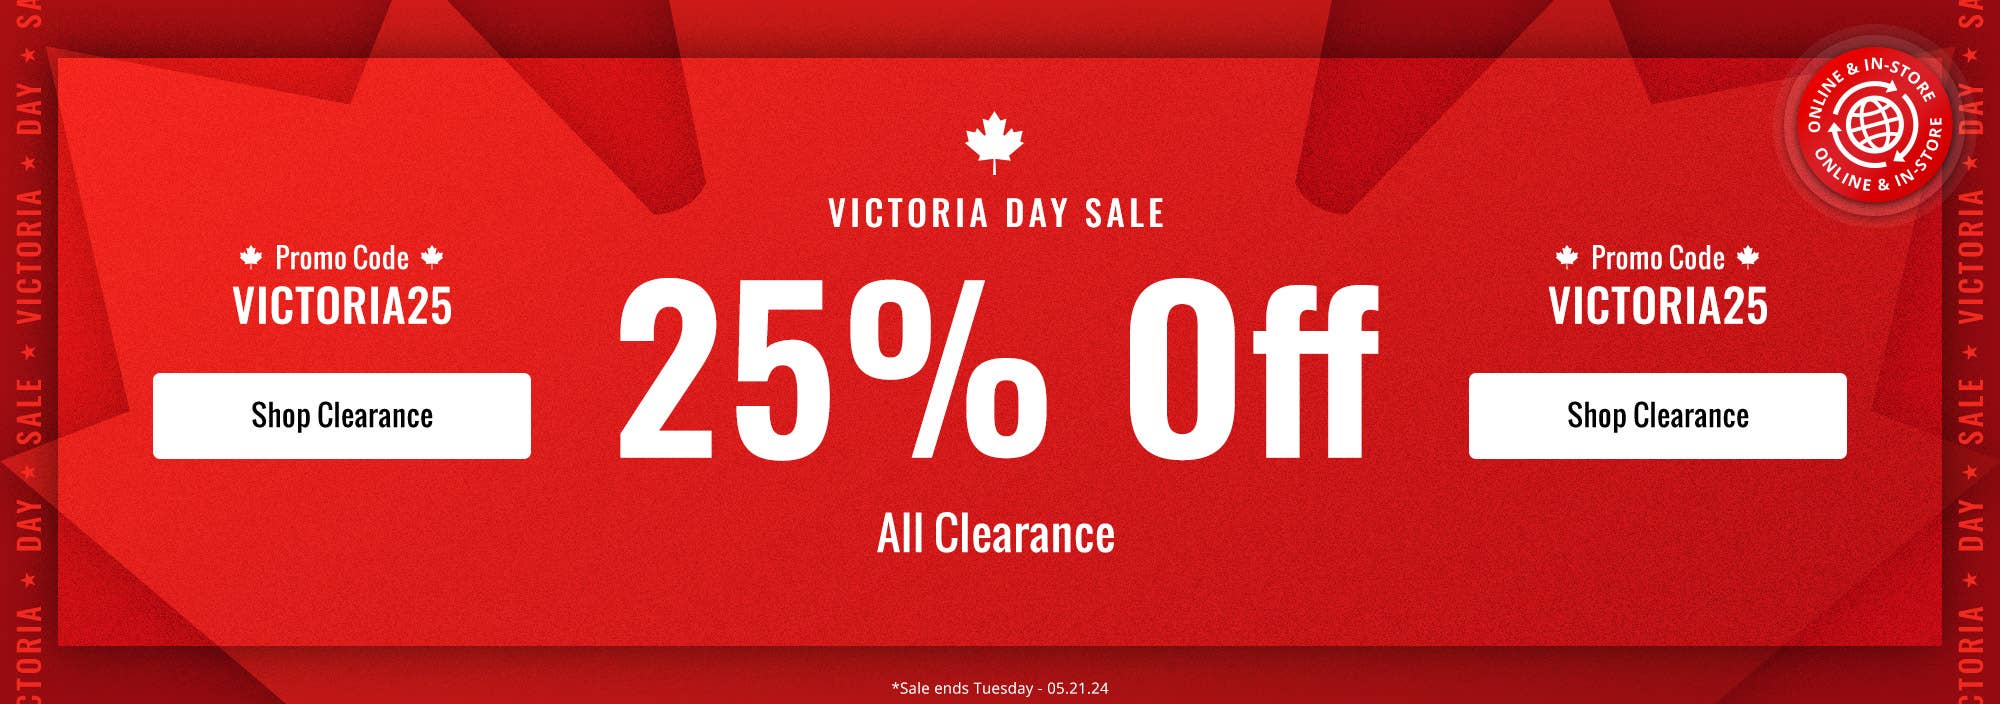 Victoria Day Sale: 25% off clearance